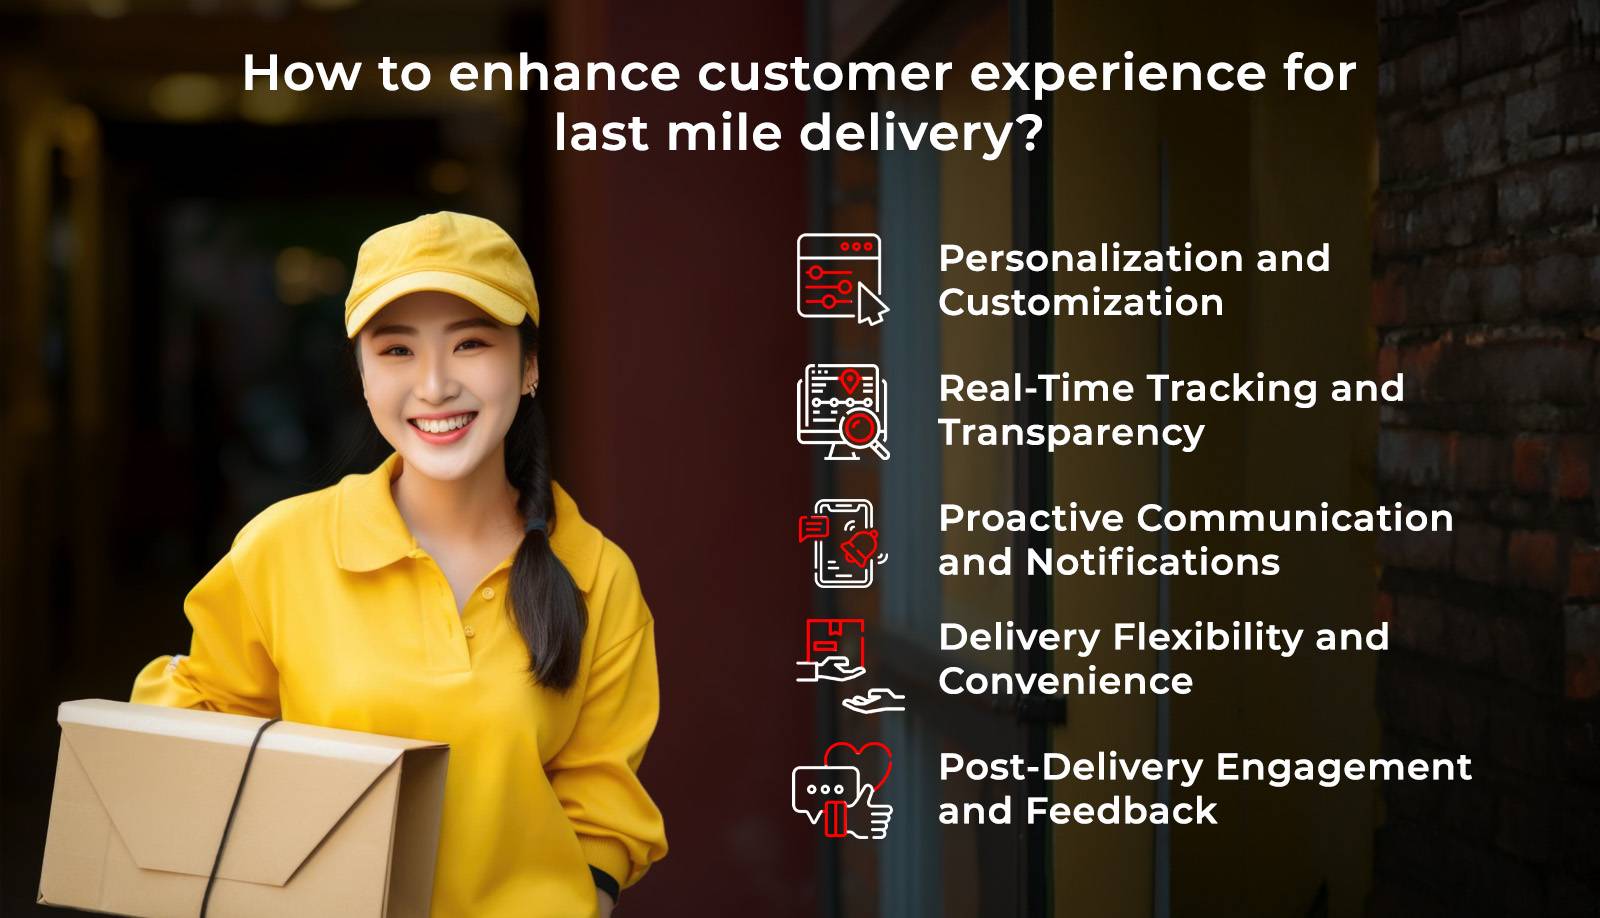 Keys to enhance last mile delivery customer experience